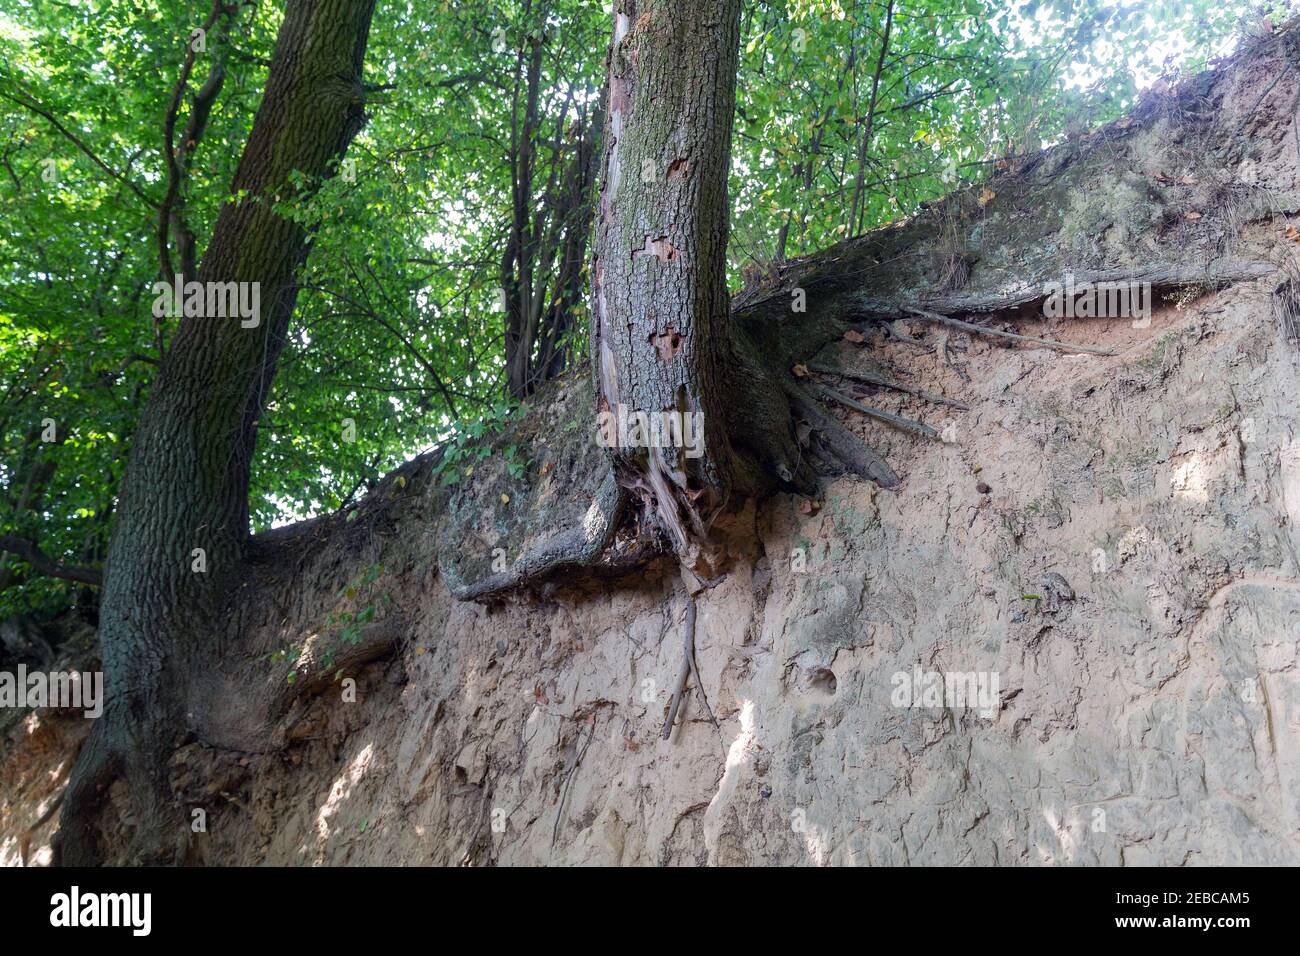 Loess ravine in the city of Kazimierz Dolny, Poland. Fantastic forms of trees and their roots that grow on the slopes Stock Photo